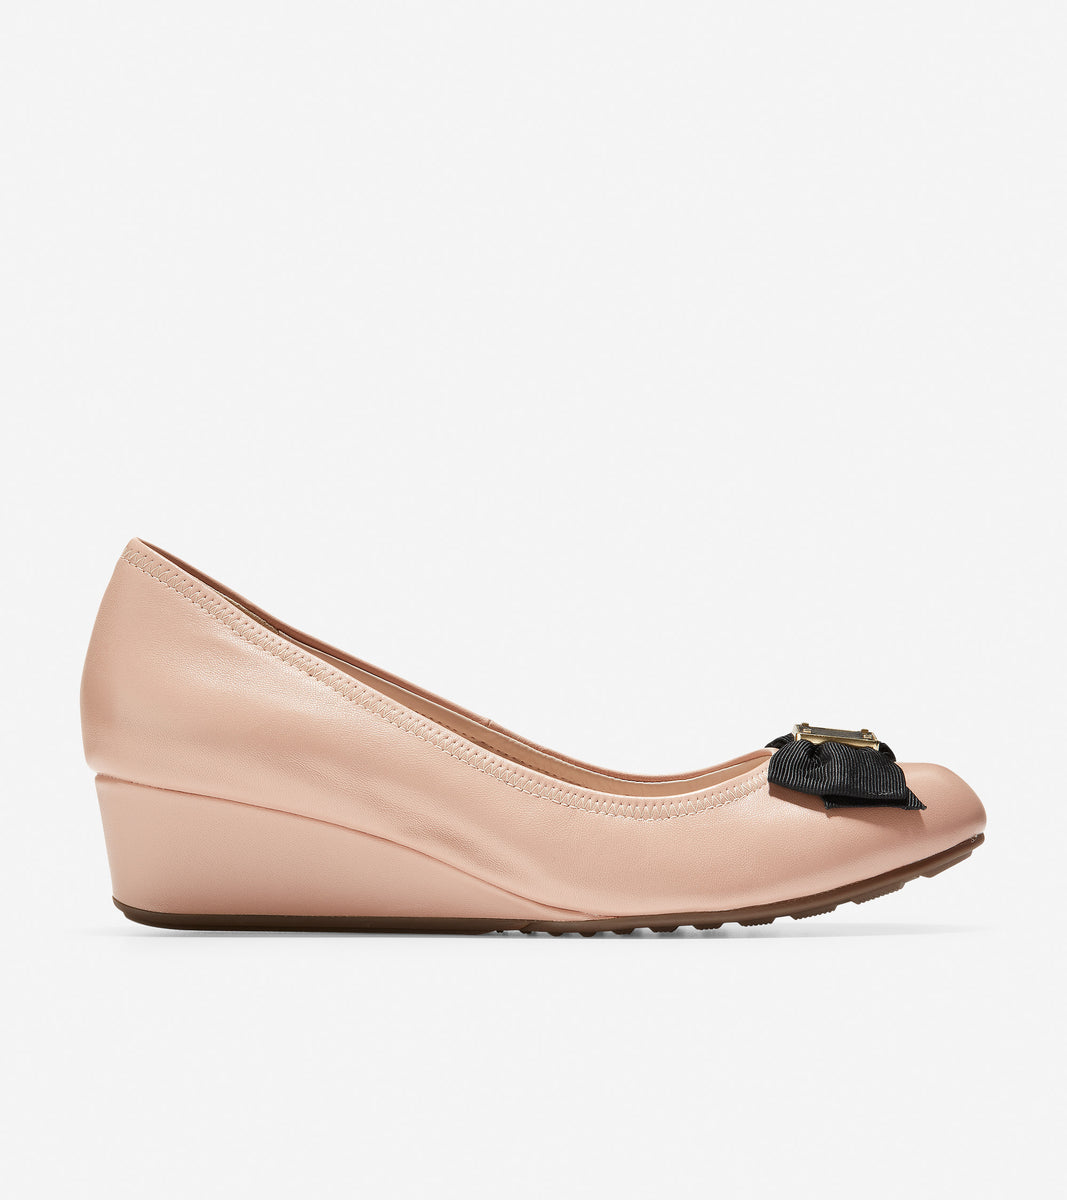 ColeHaan-Tali Soft Bow Wedge-w12821-Toasted Almond Leather